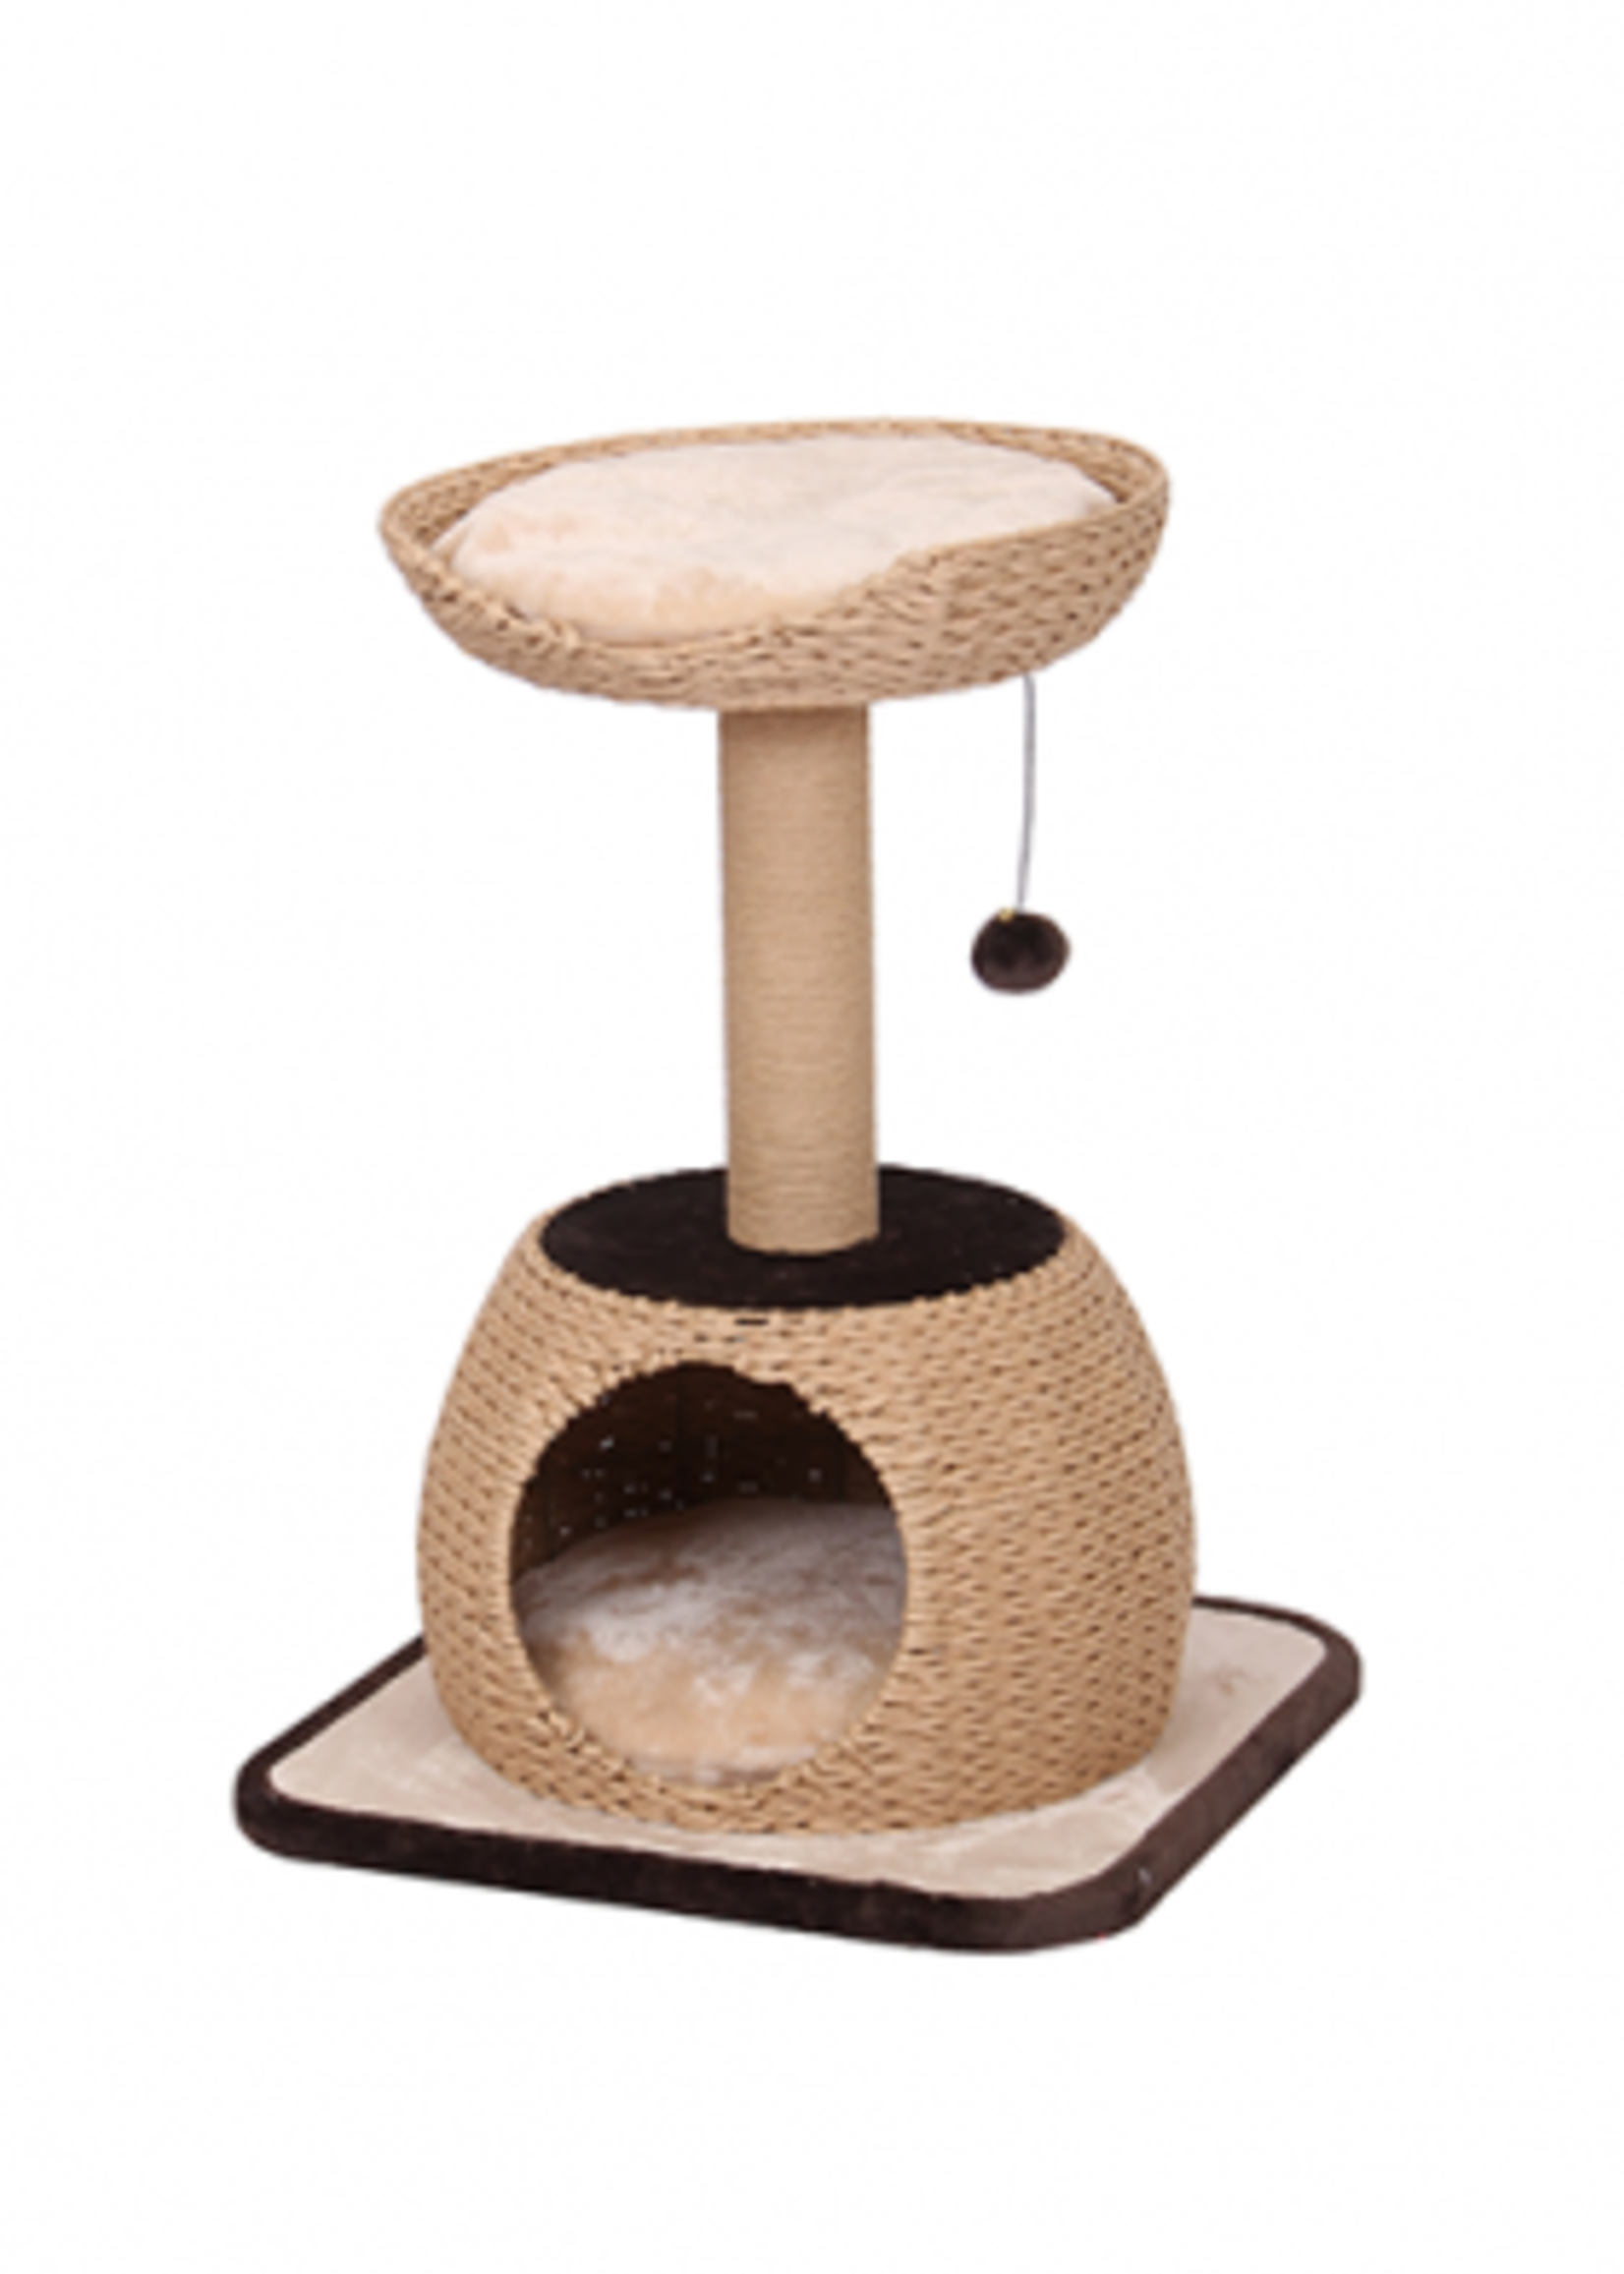 PETPALS GROUP© CAT TREE WITH CONDO NATURAL POST